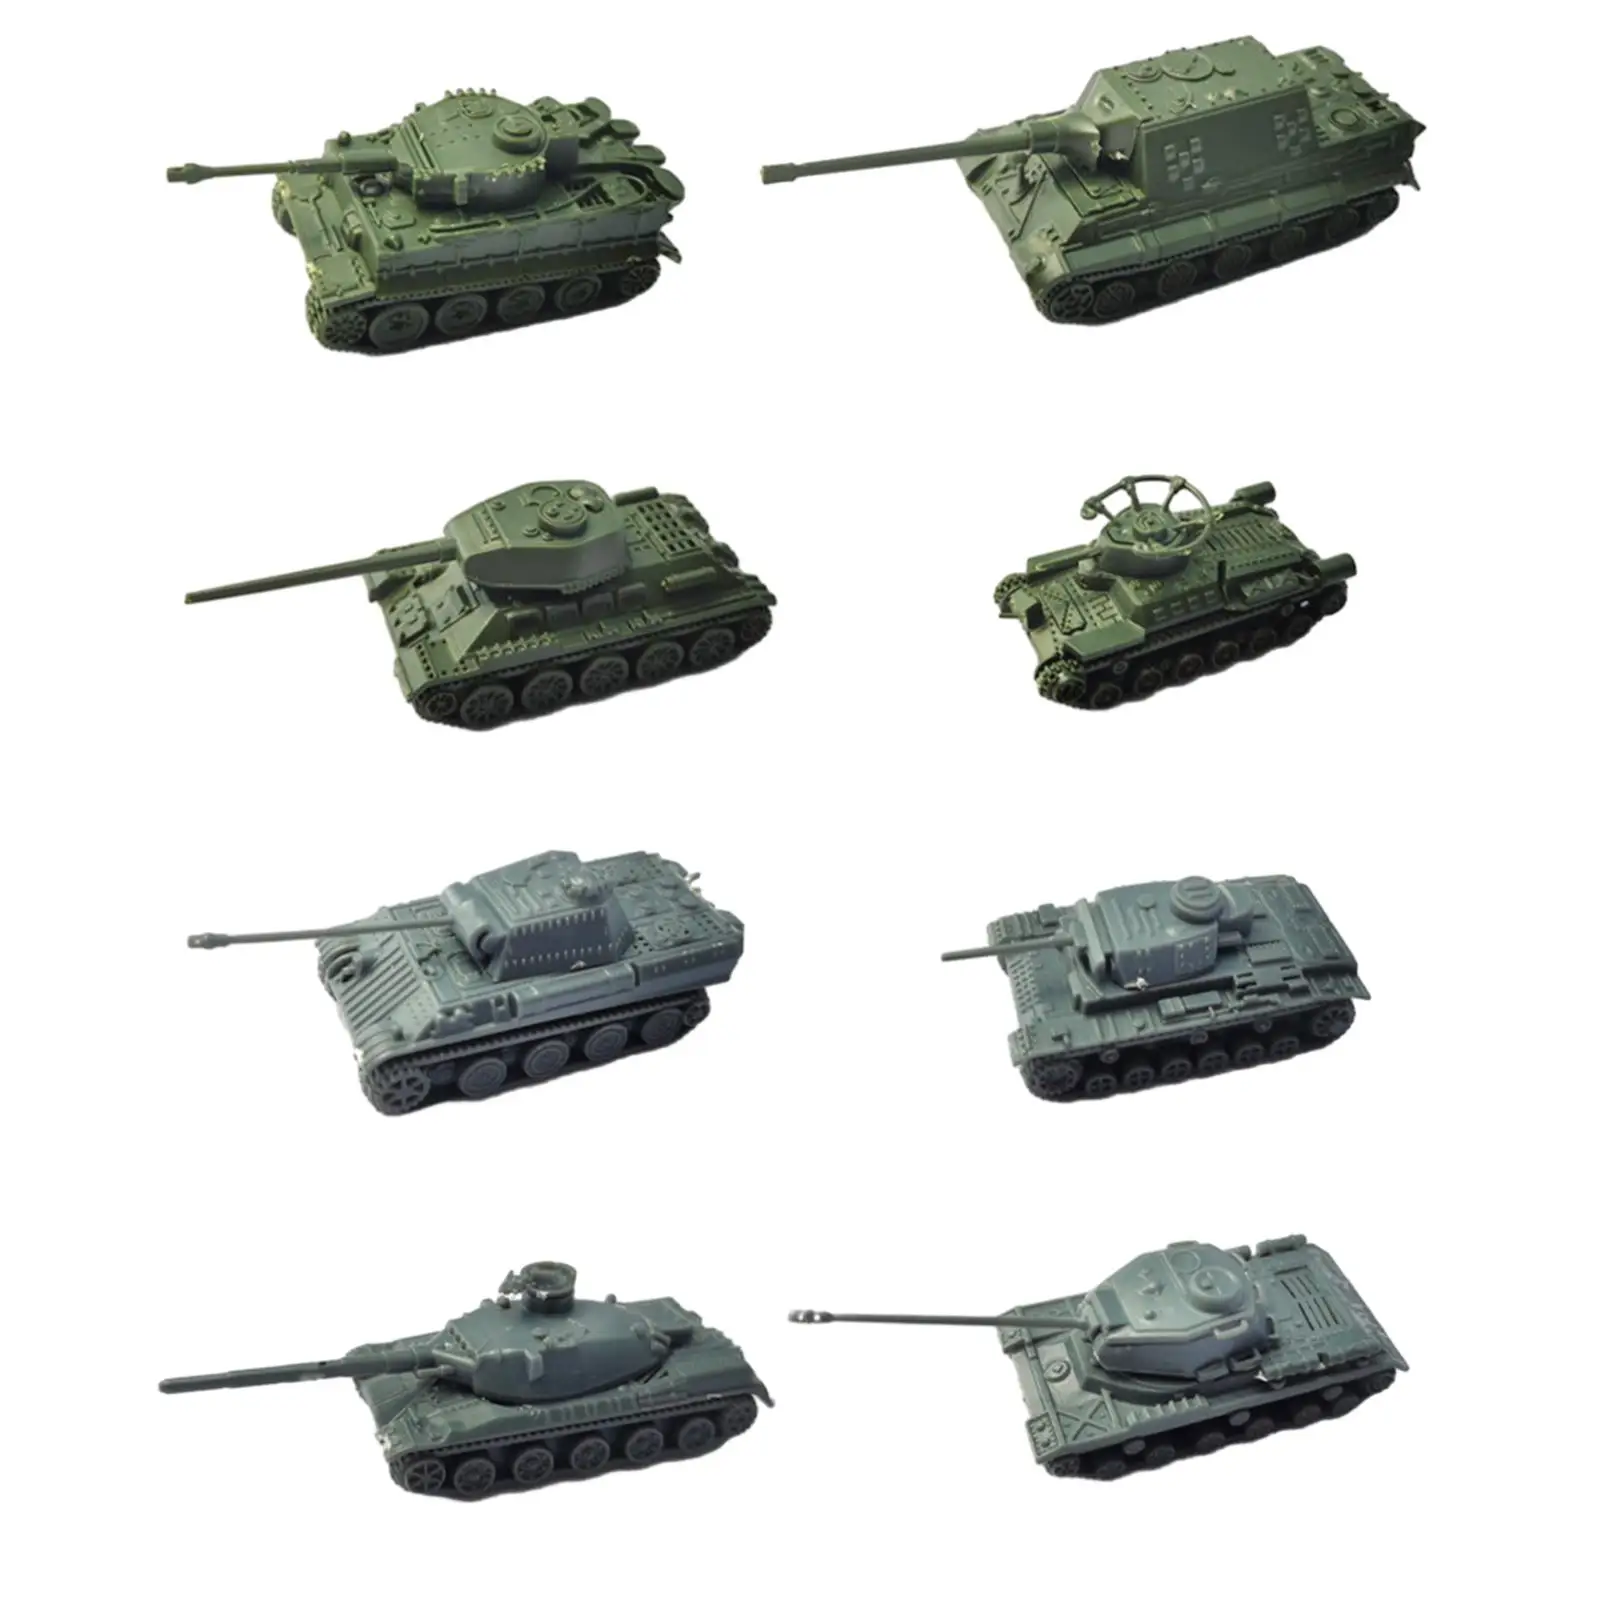 8x 1/144 Tank Model T34/85 Education Toy DIY Puzzle Building Projects 4D Modern Tank Model for Toddlers Boy Girl Holiday Gifts